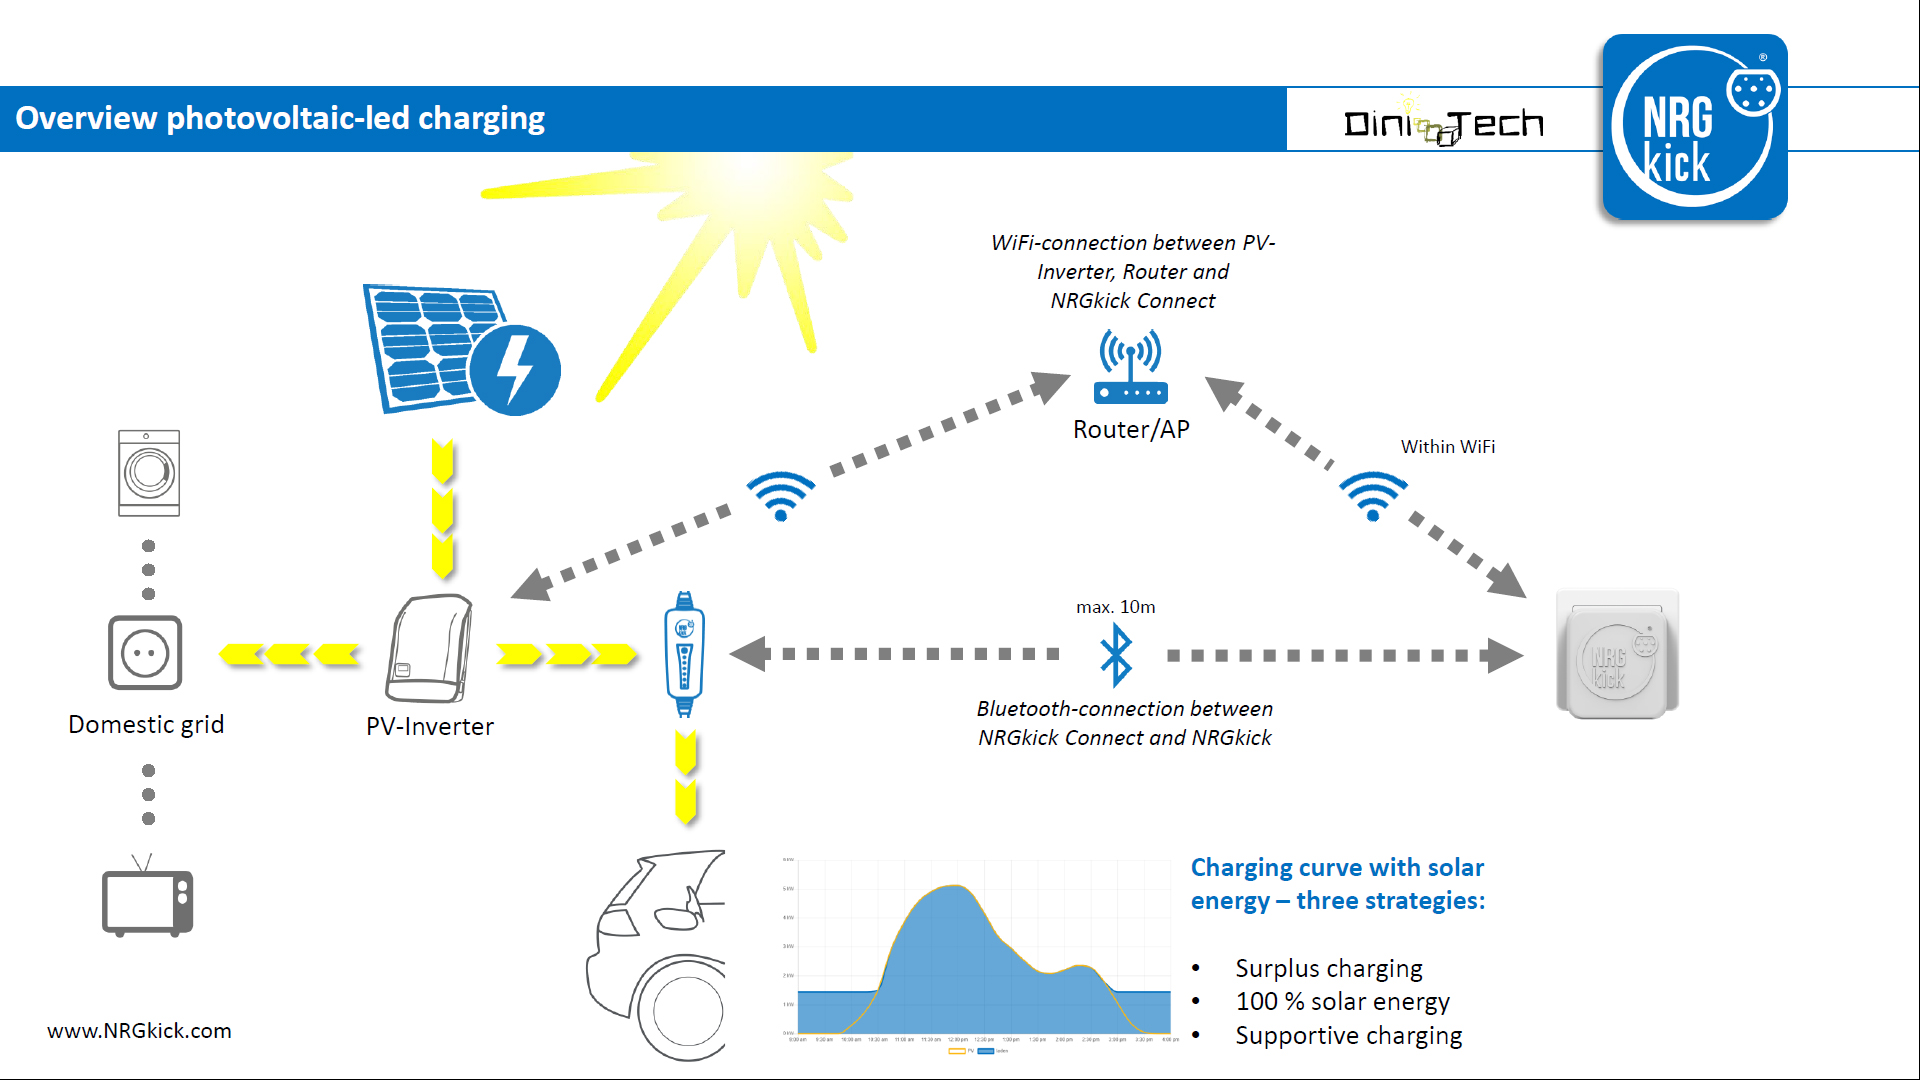 Overview photovoltaic-led charging